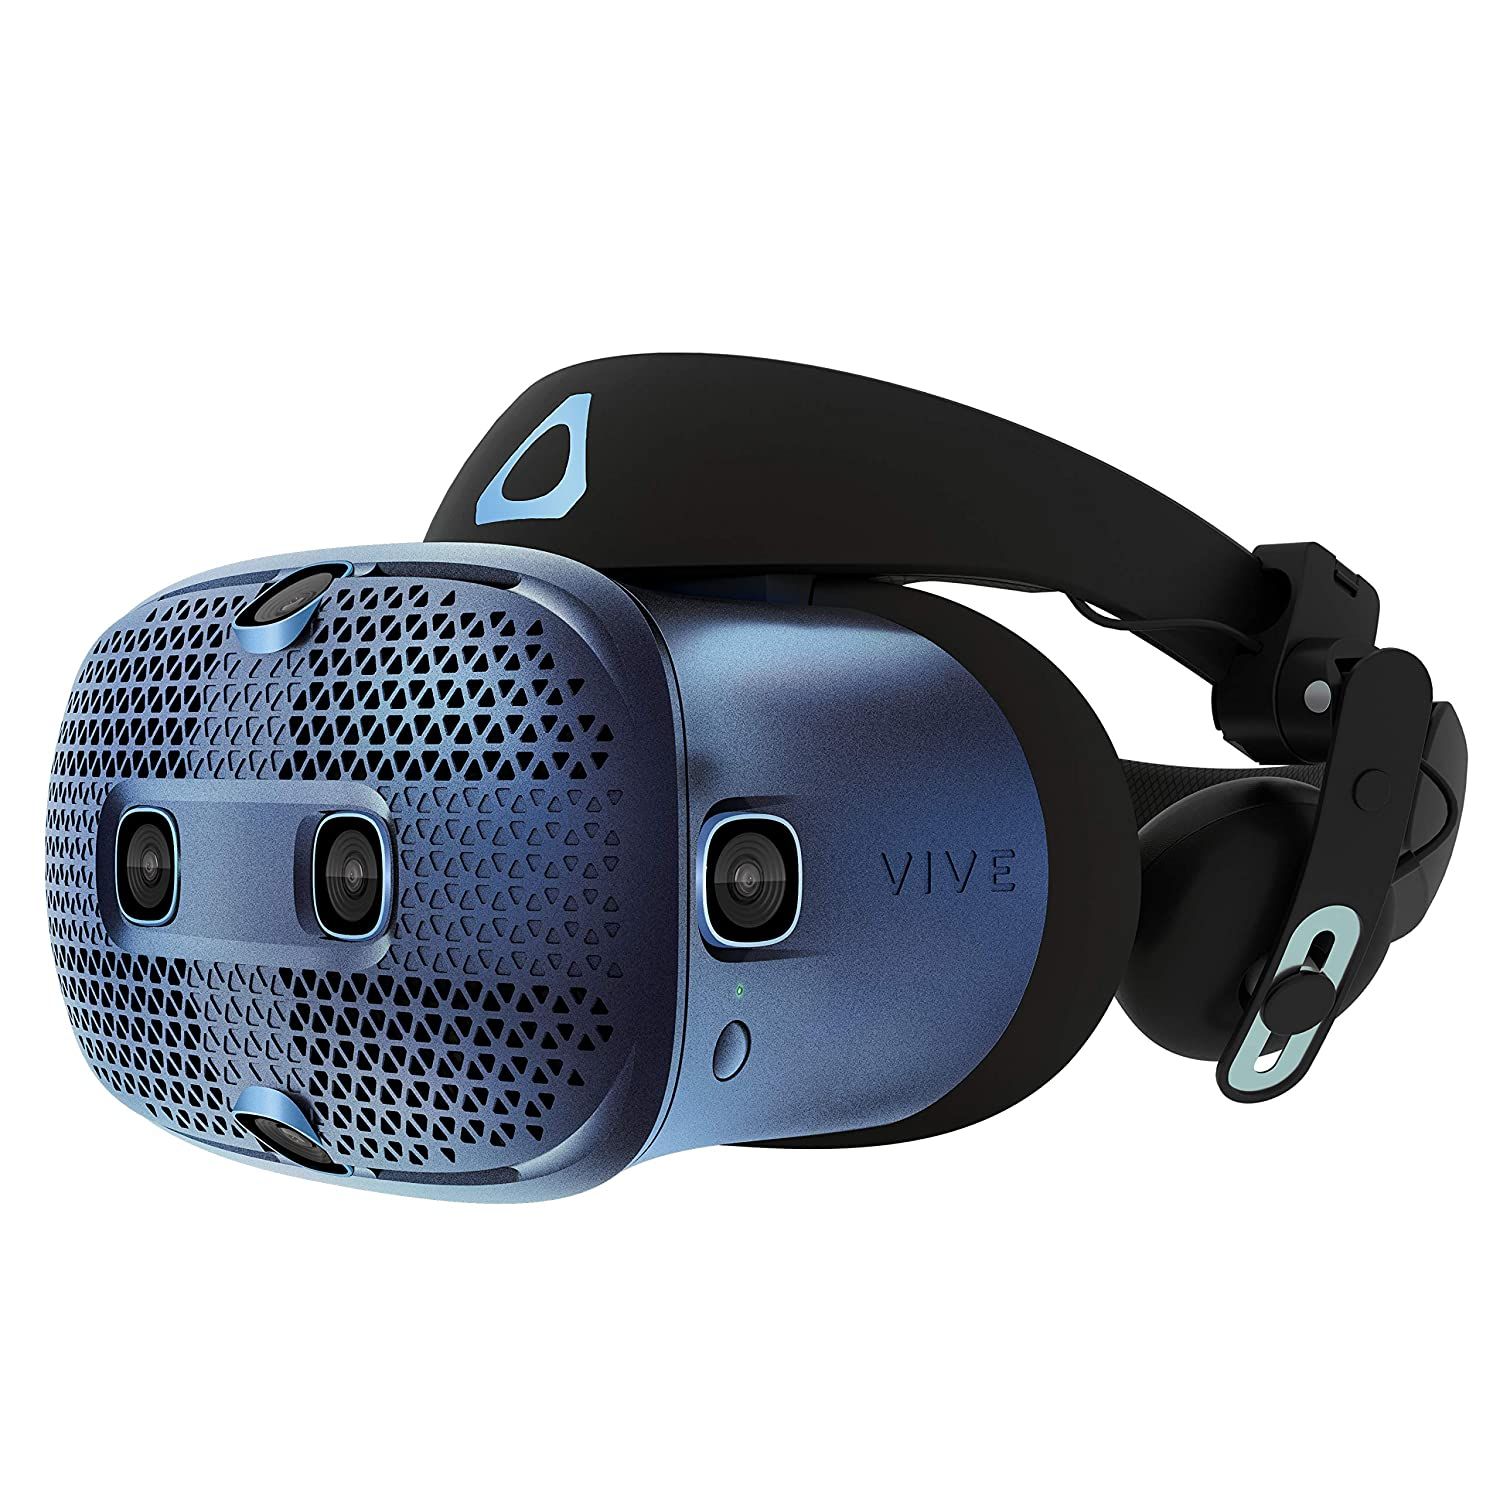 HTC Vive Cosmos side